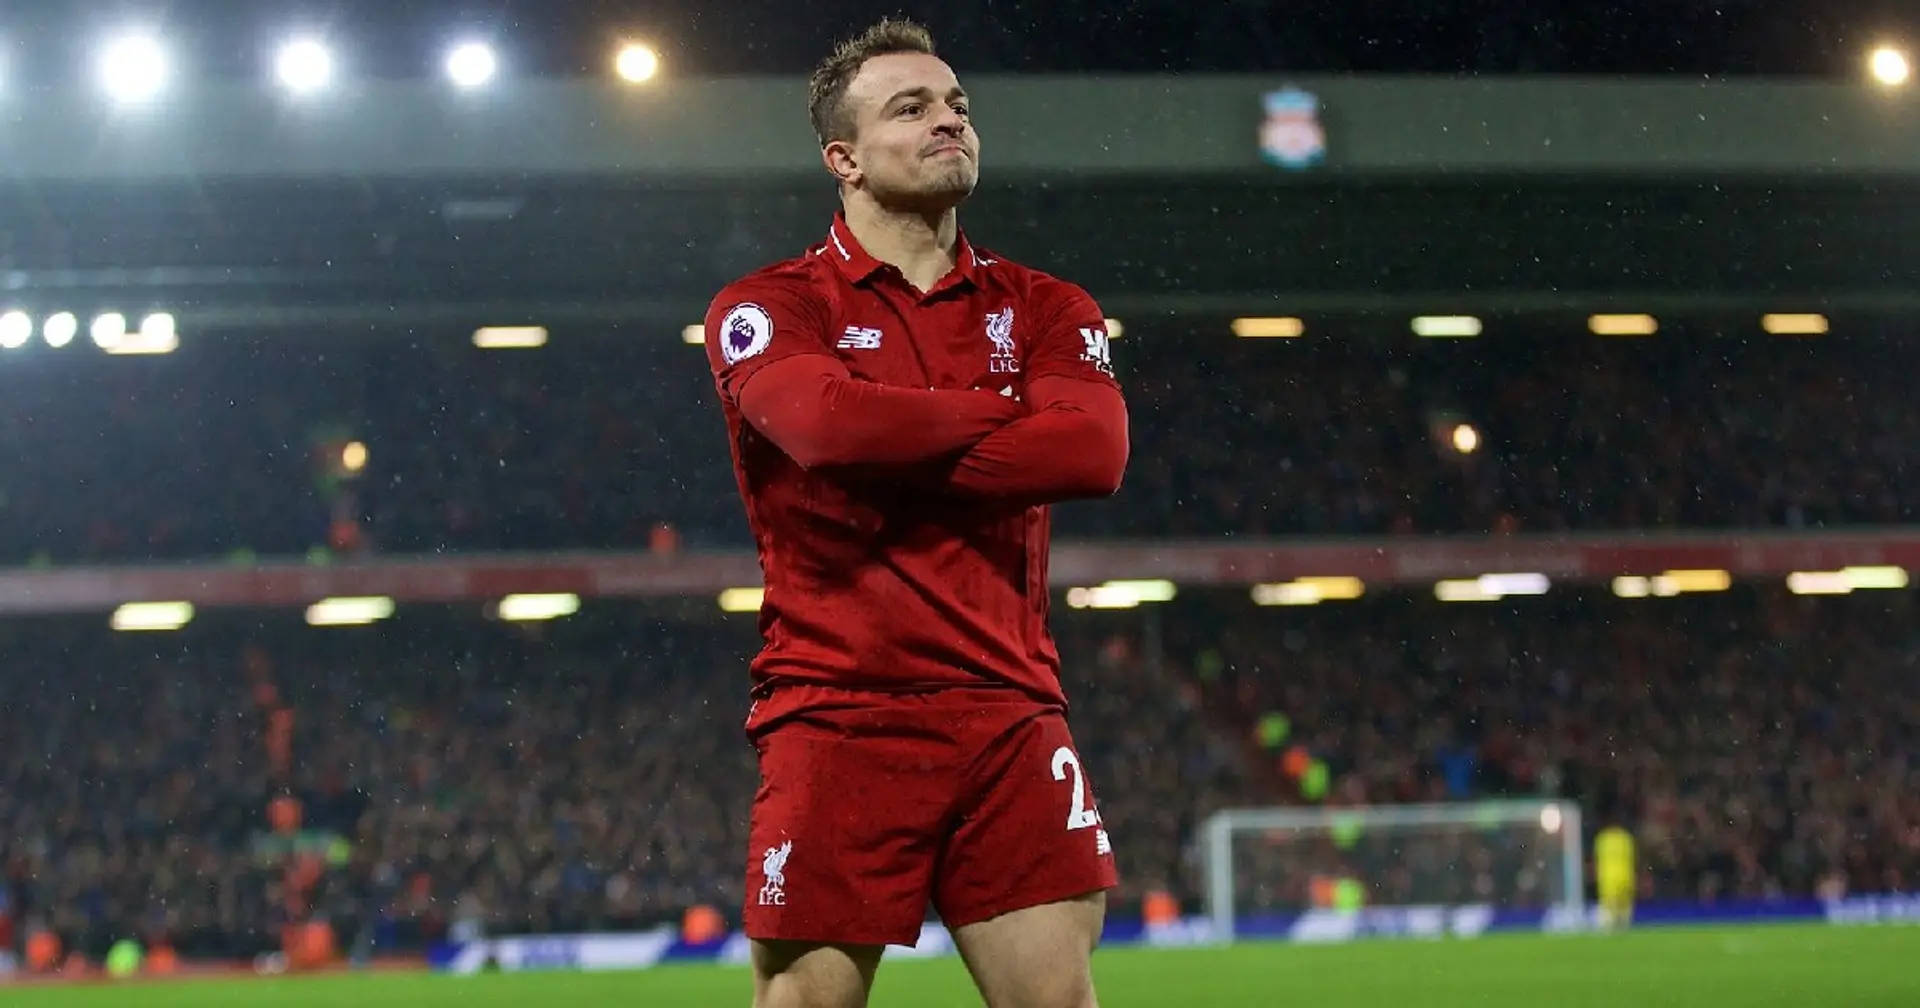 'For smaller teams, it's easier to come to Anfield with no fans': Shaqiri explains importance of fans to Liverpool